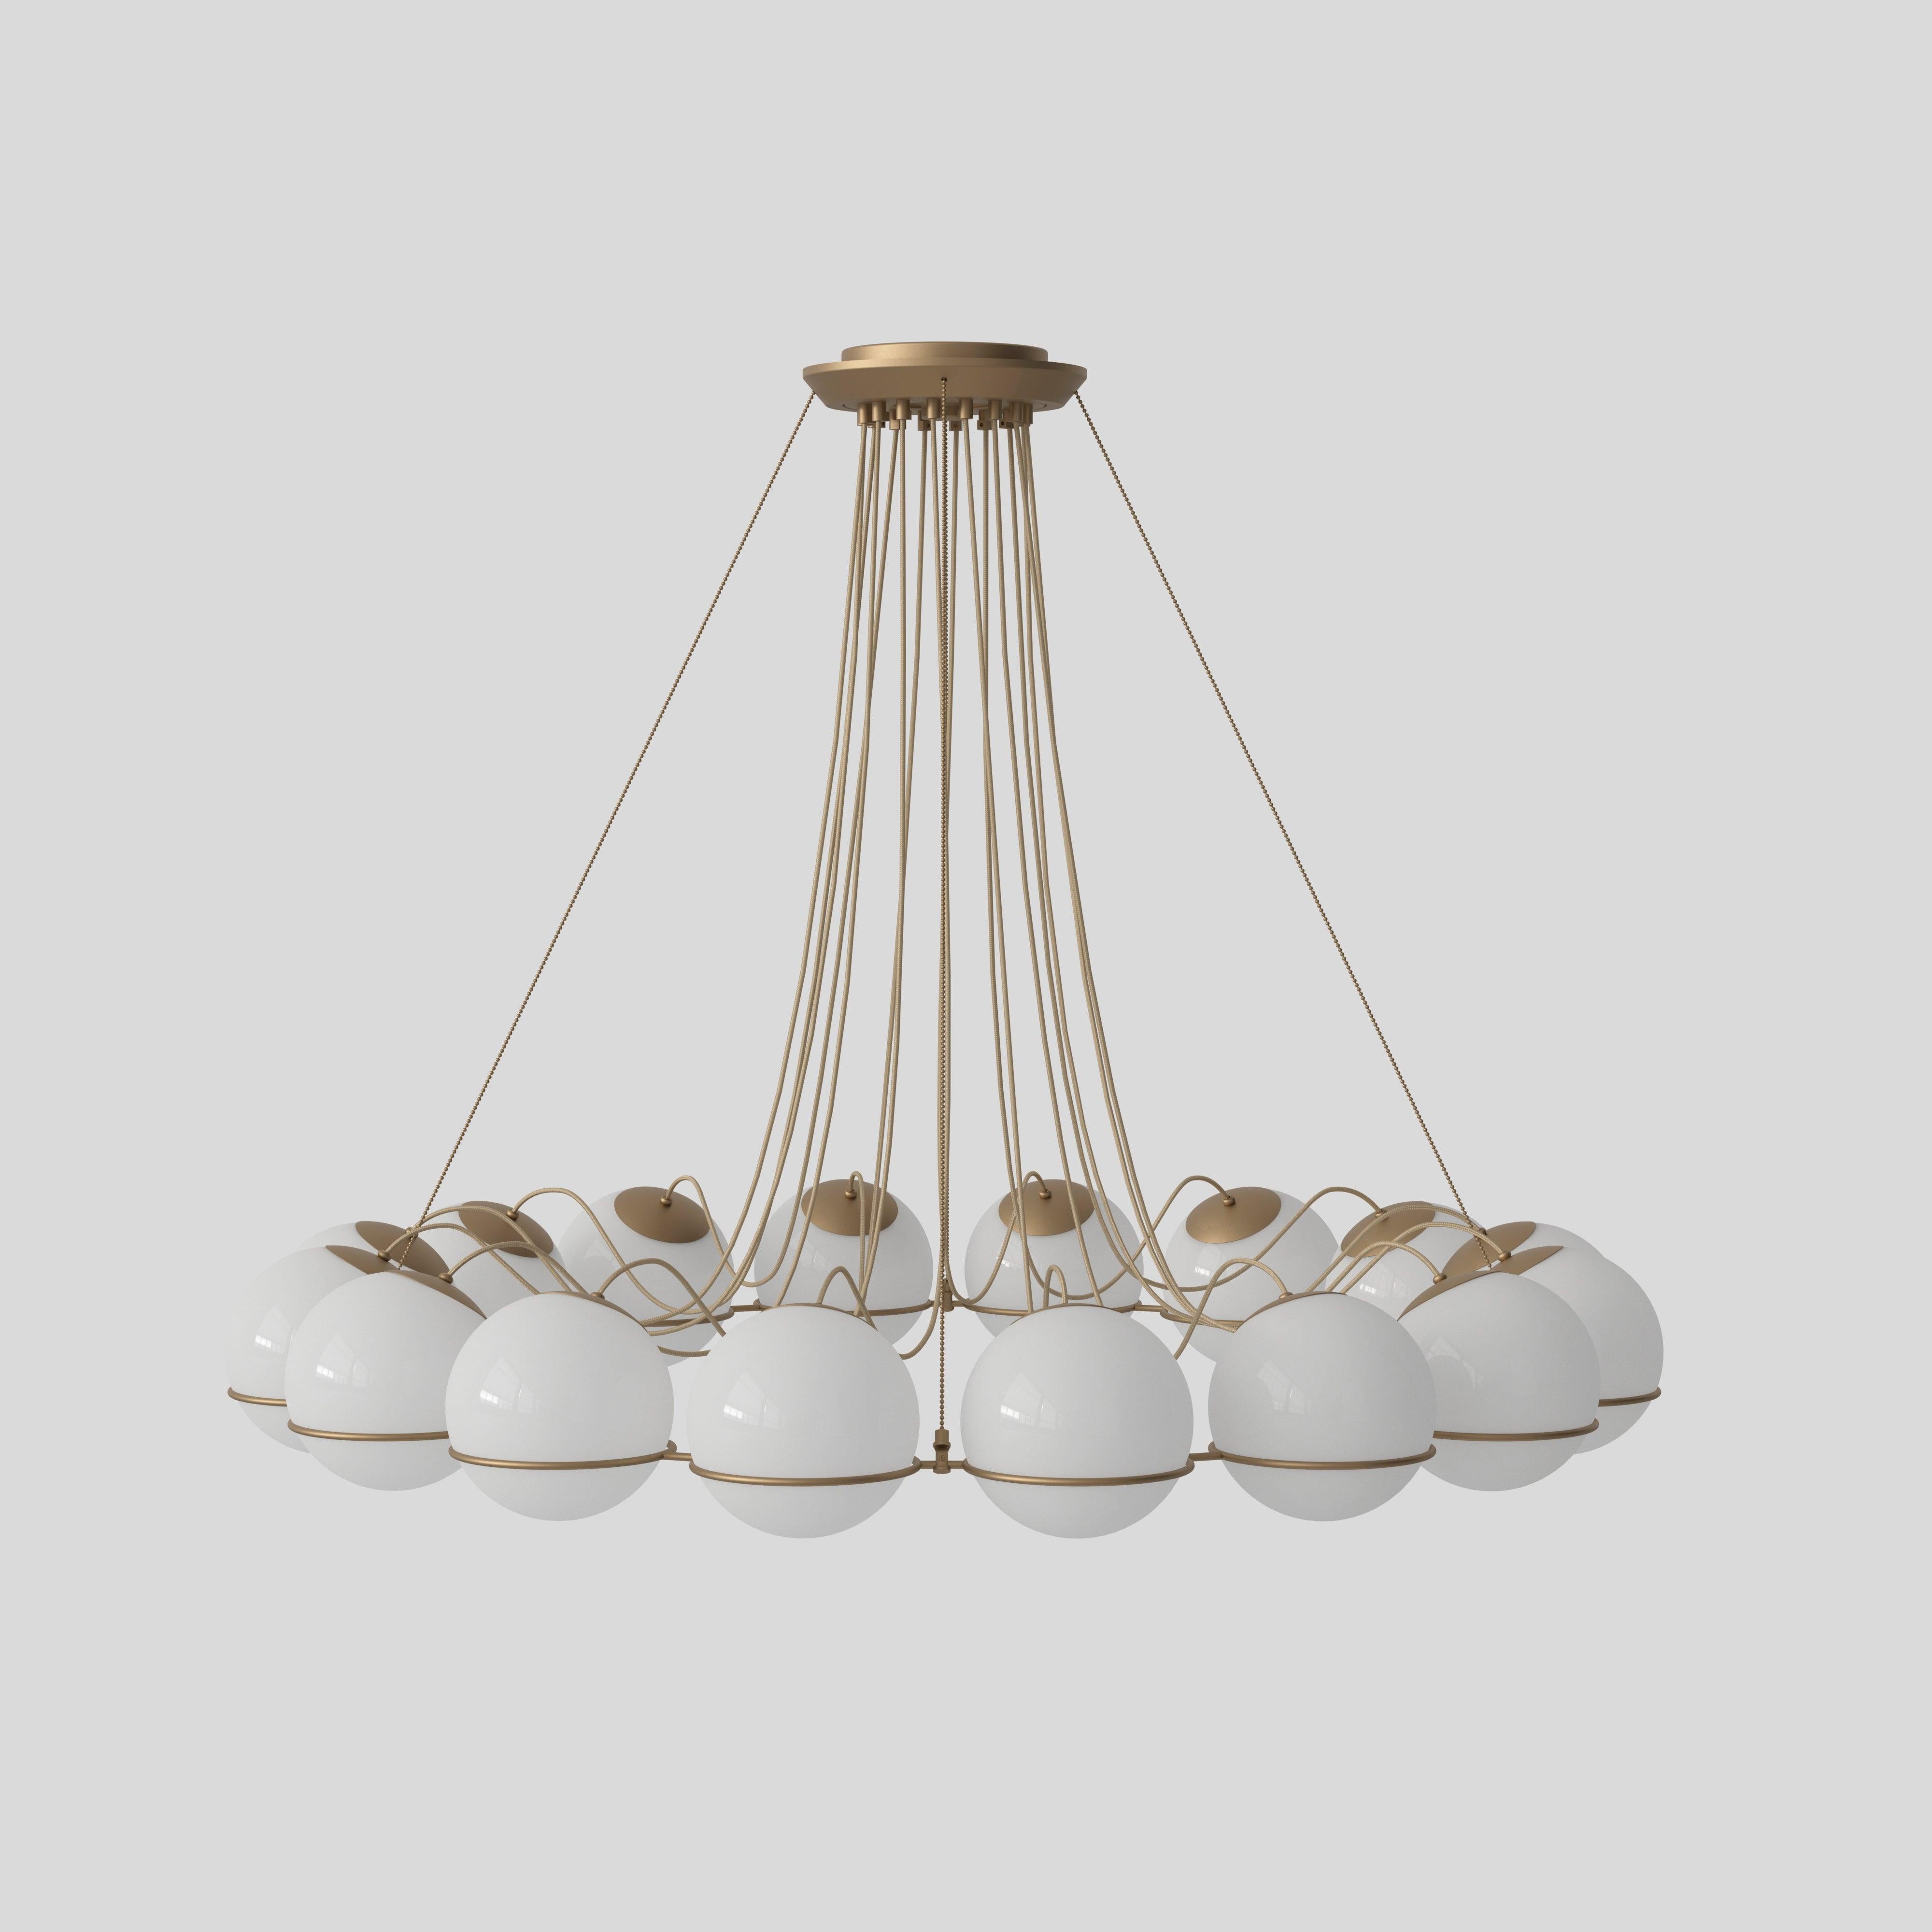 Model 2109
Design by Gino Sarfatti
The Le Sfere chandelier is composed of a circular array of blown opaline glass spheres. Each sphere is held in place by a large Black or Champagne painted aluminium ring-structure. Each ring has a small cut,